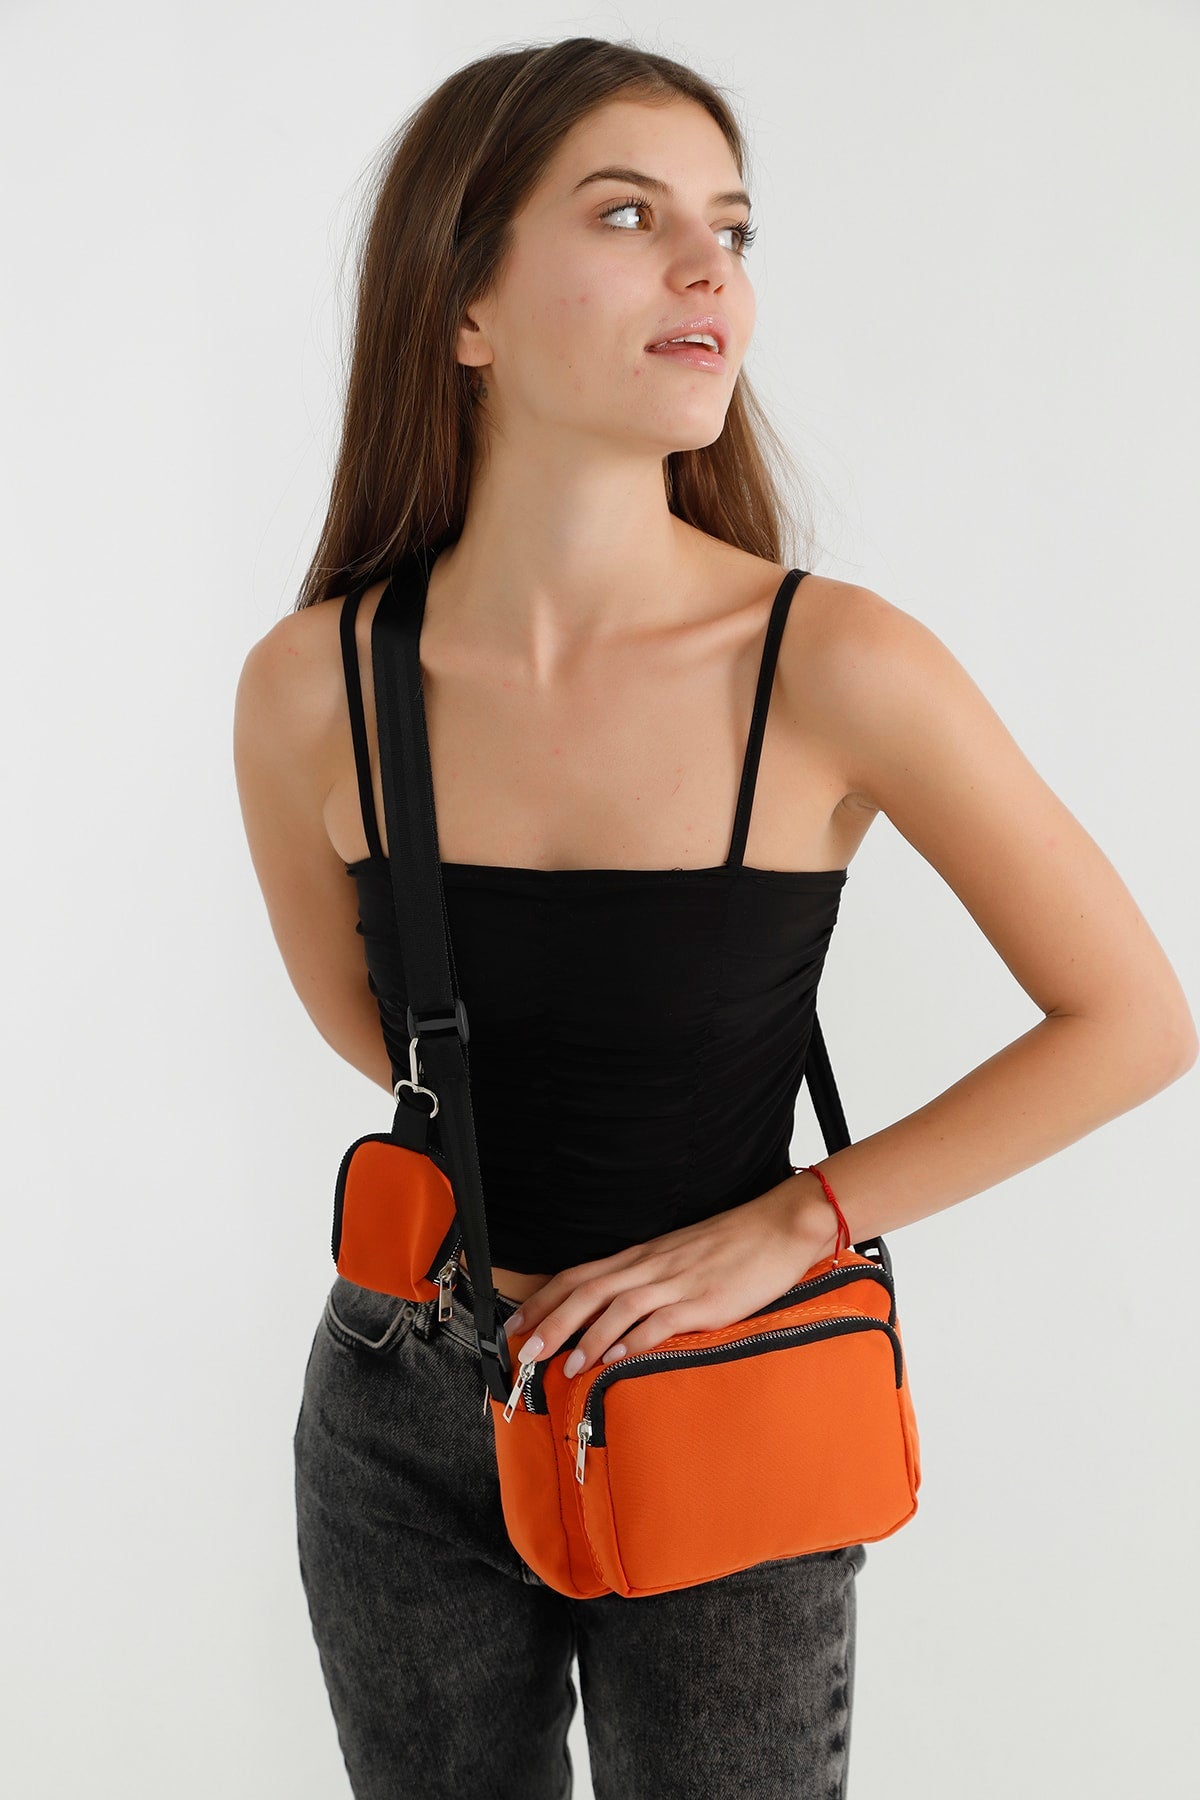 Orange U4 Canvas Women's Cross Shoulder Bag With 2 Compartments And Wallet With Adjustable Strap B:17 E:22 G:1